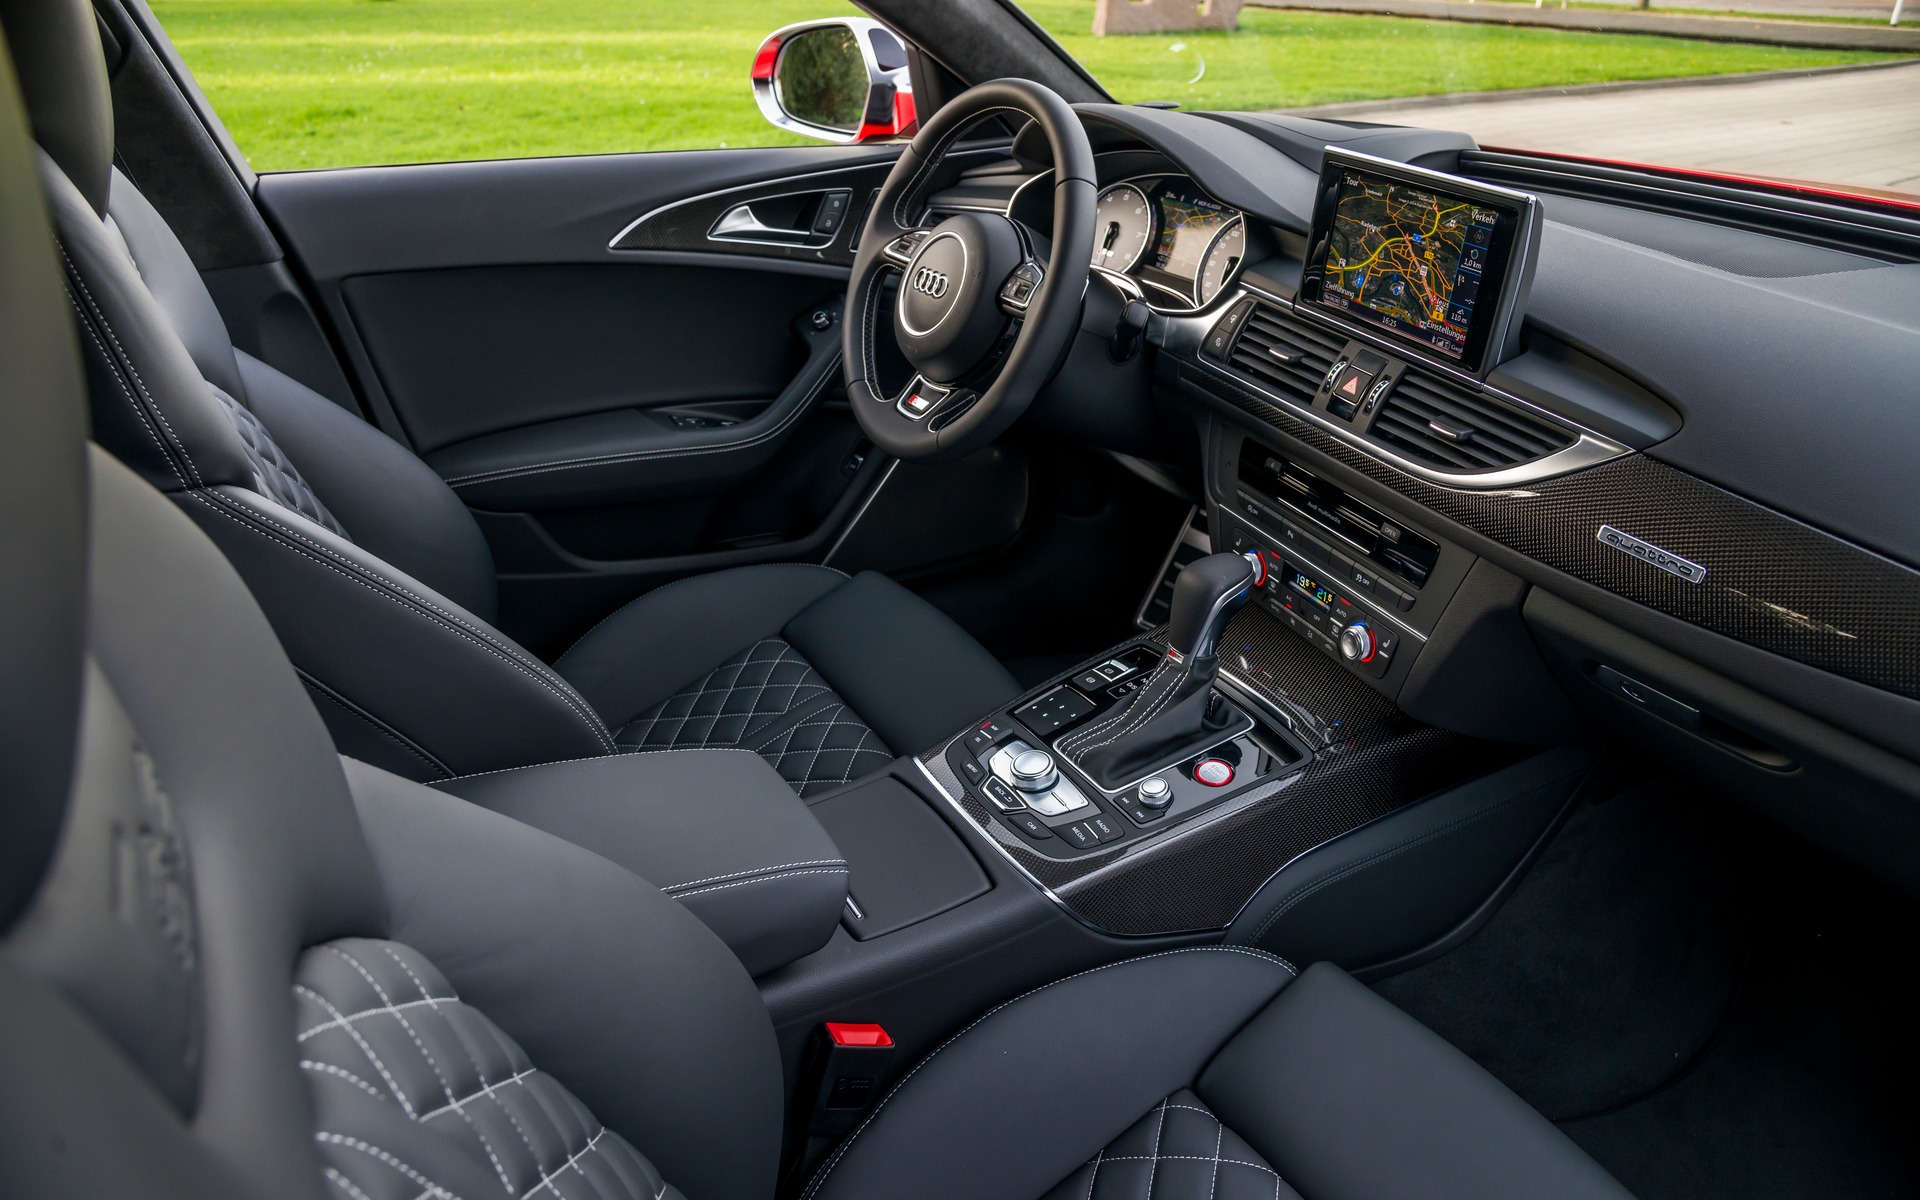 Audi really does make great interiors.